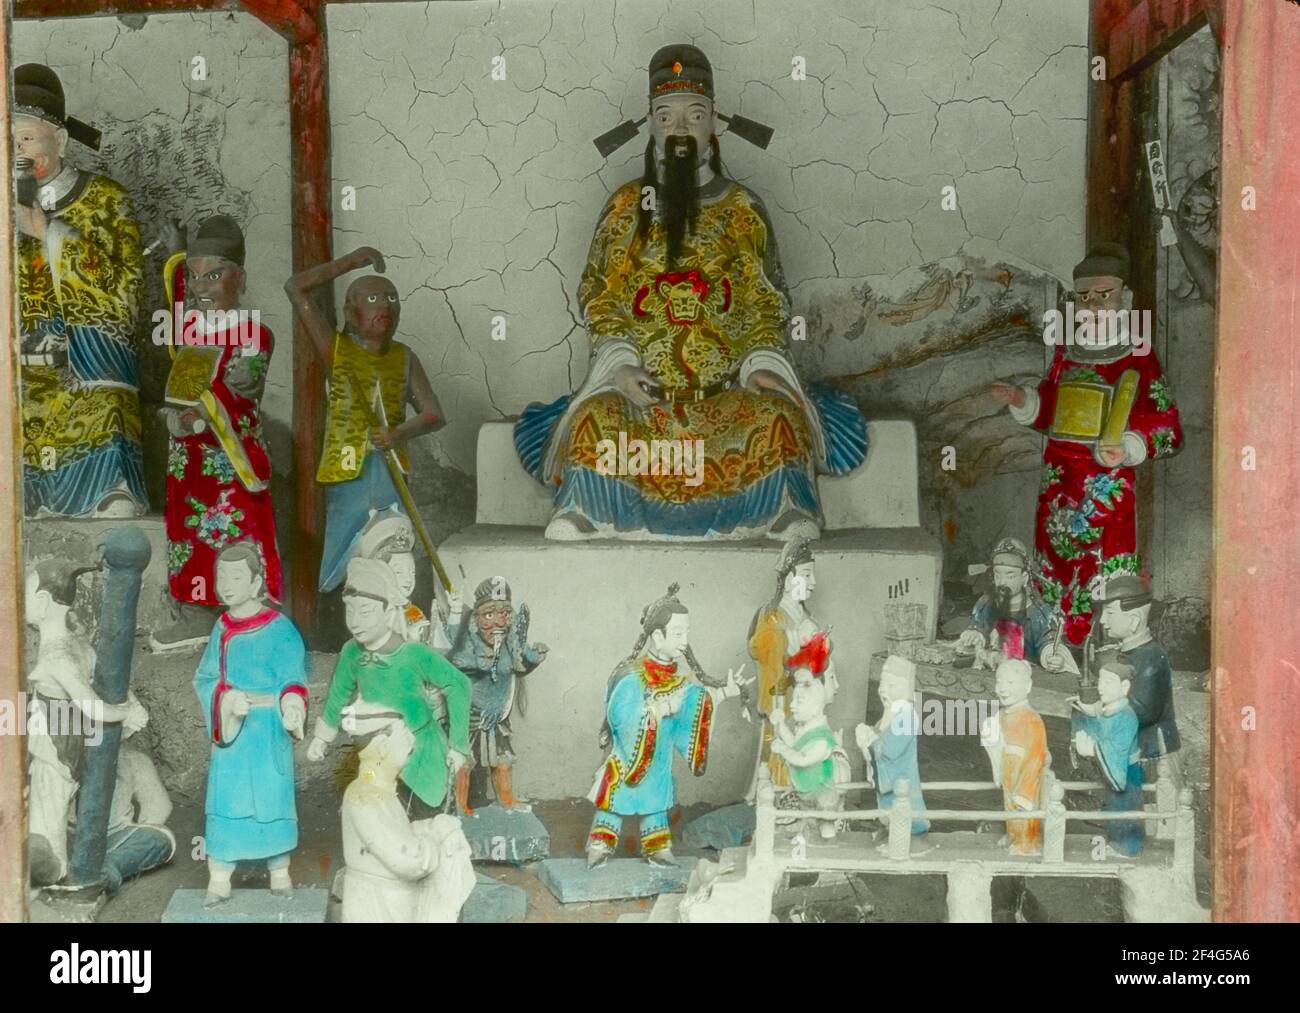 A colorful statuary vignette with a variety of human figures and a large central sculpture depicting a man, possibly an Emperor, wearing colorful Tang-era garments, Sichuan, China, 1917. From the Sidney D. Gamble photographs collection. () Stock Photo